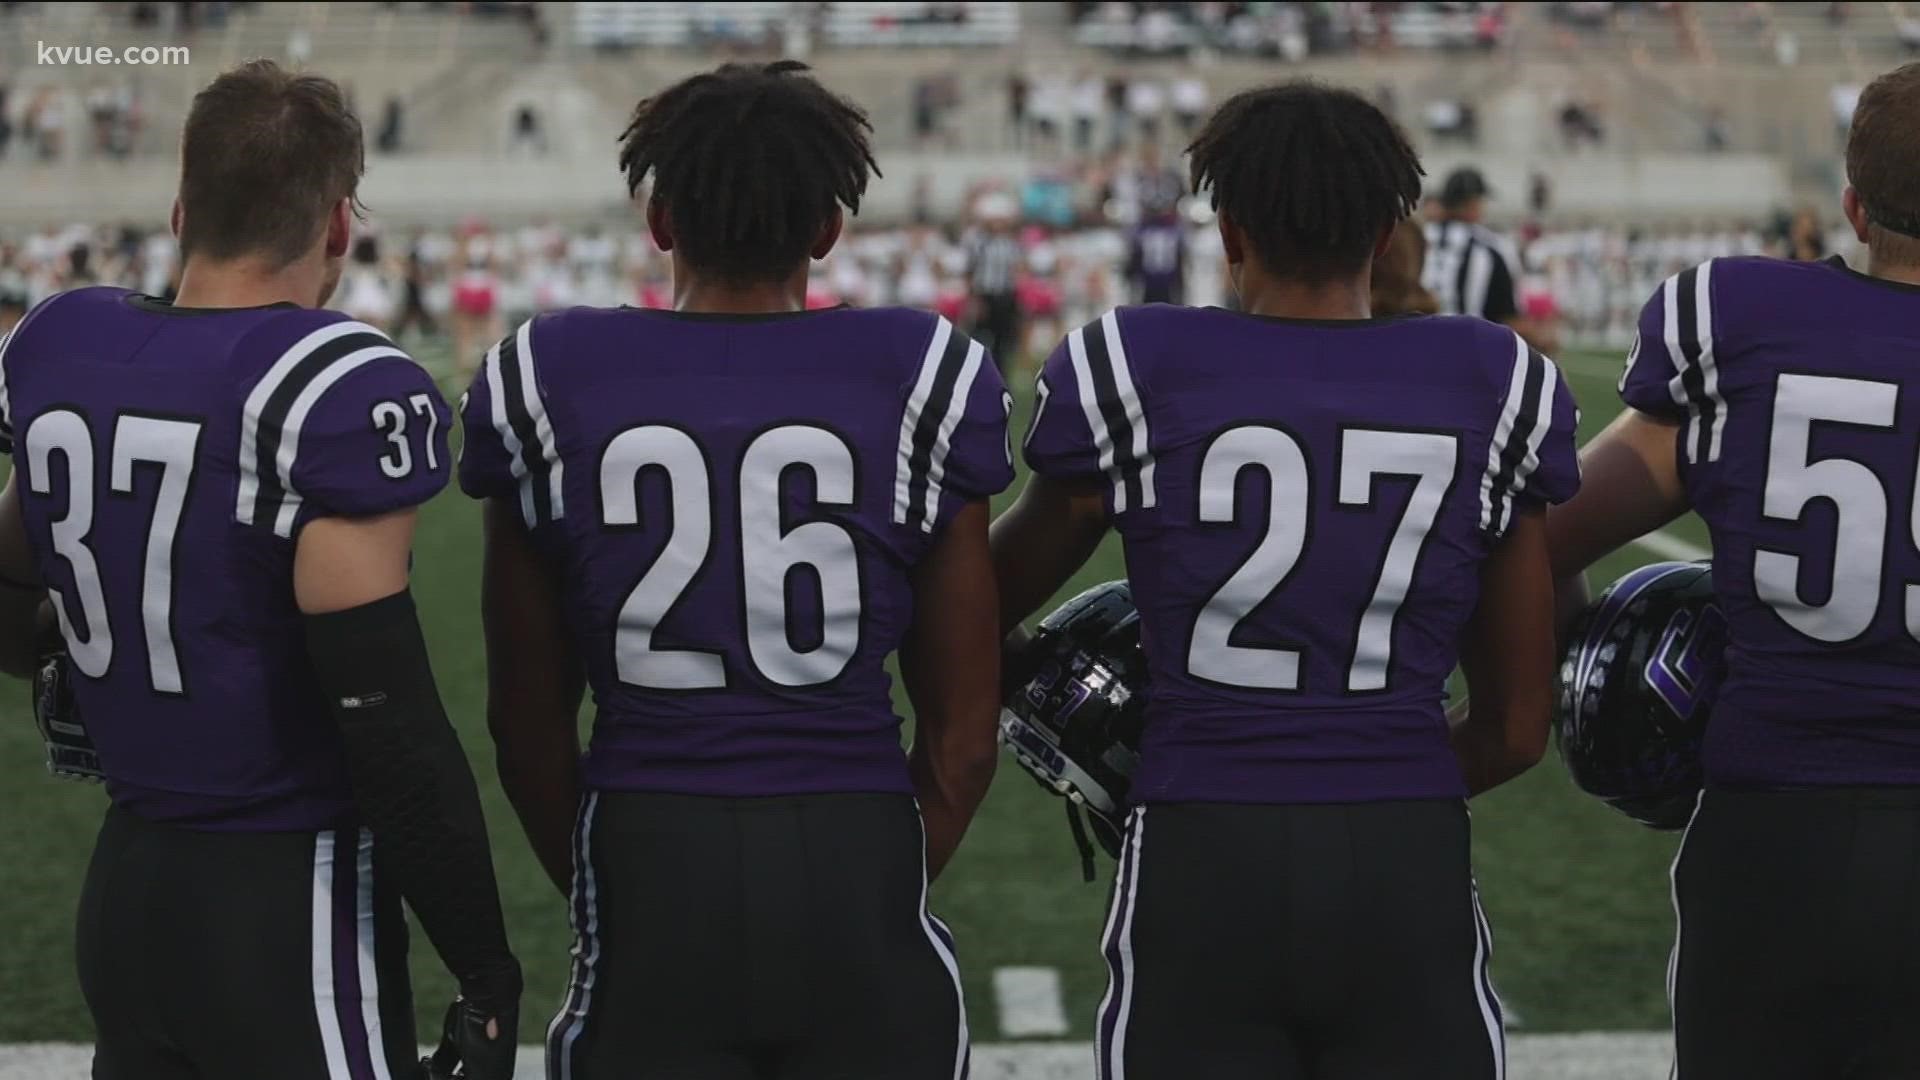 Devin and Levi Jones are identical twins and seniors at Cedar Ridge High School who are inspiring others by balancing football and marching band.